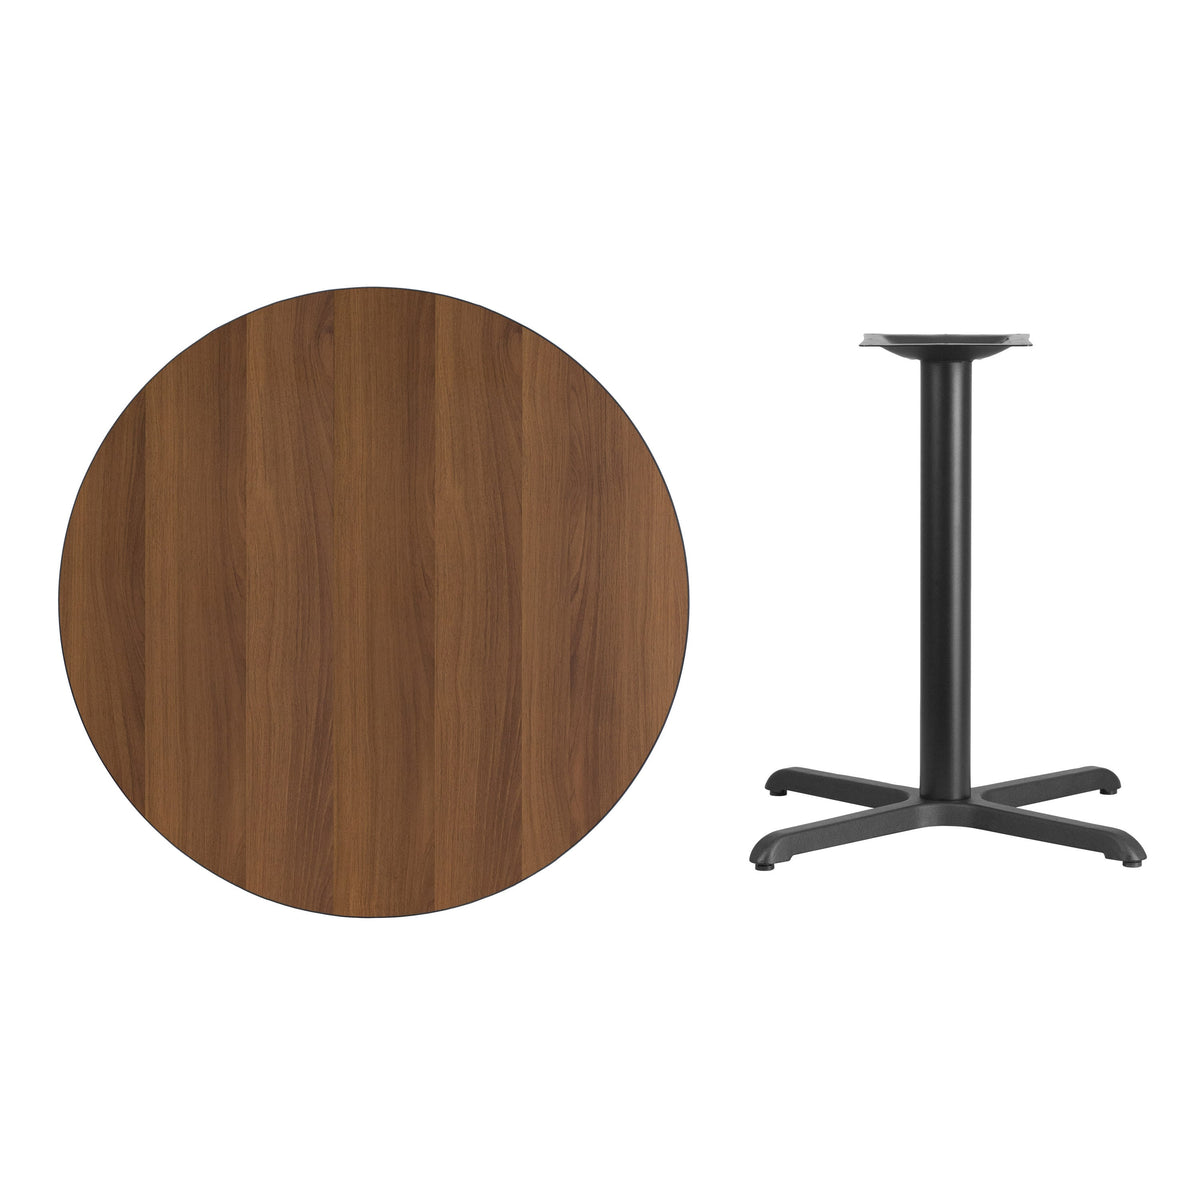 Walnut |#| 36inch Round Walnut Laminate Table Top with 30inch x 30inch Table Height Base